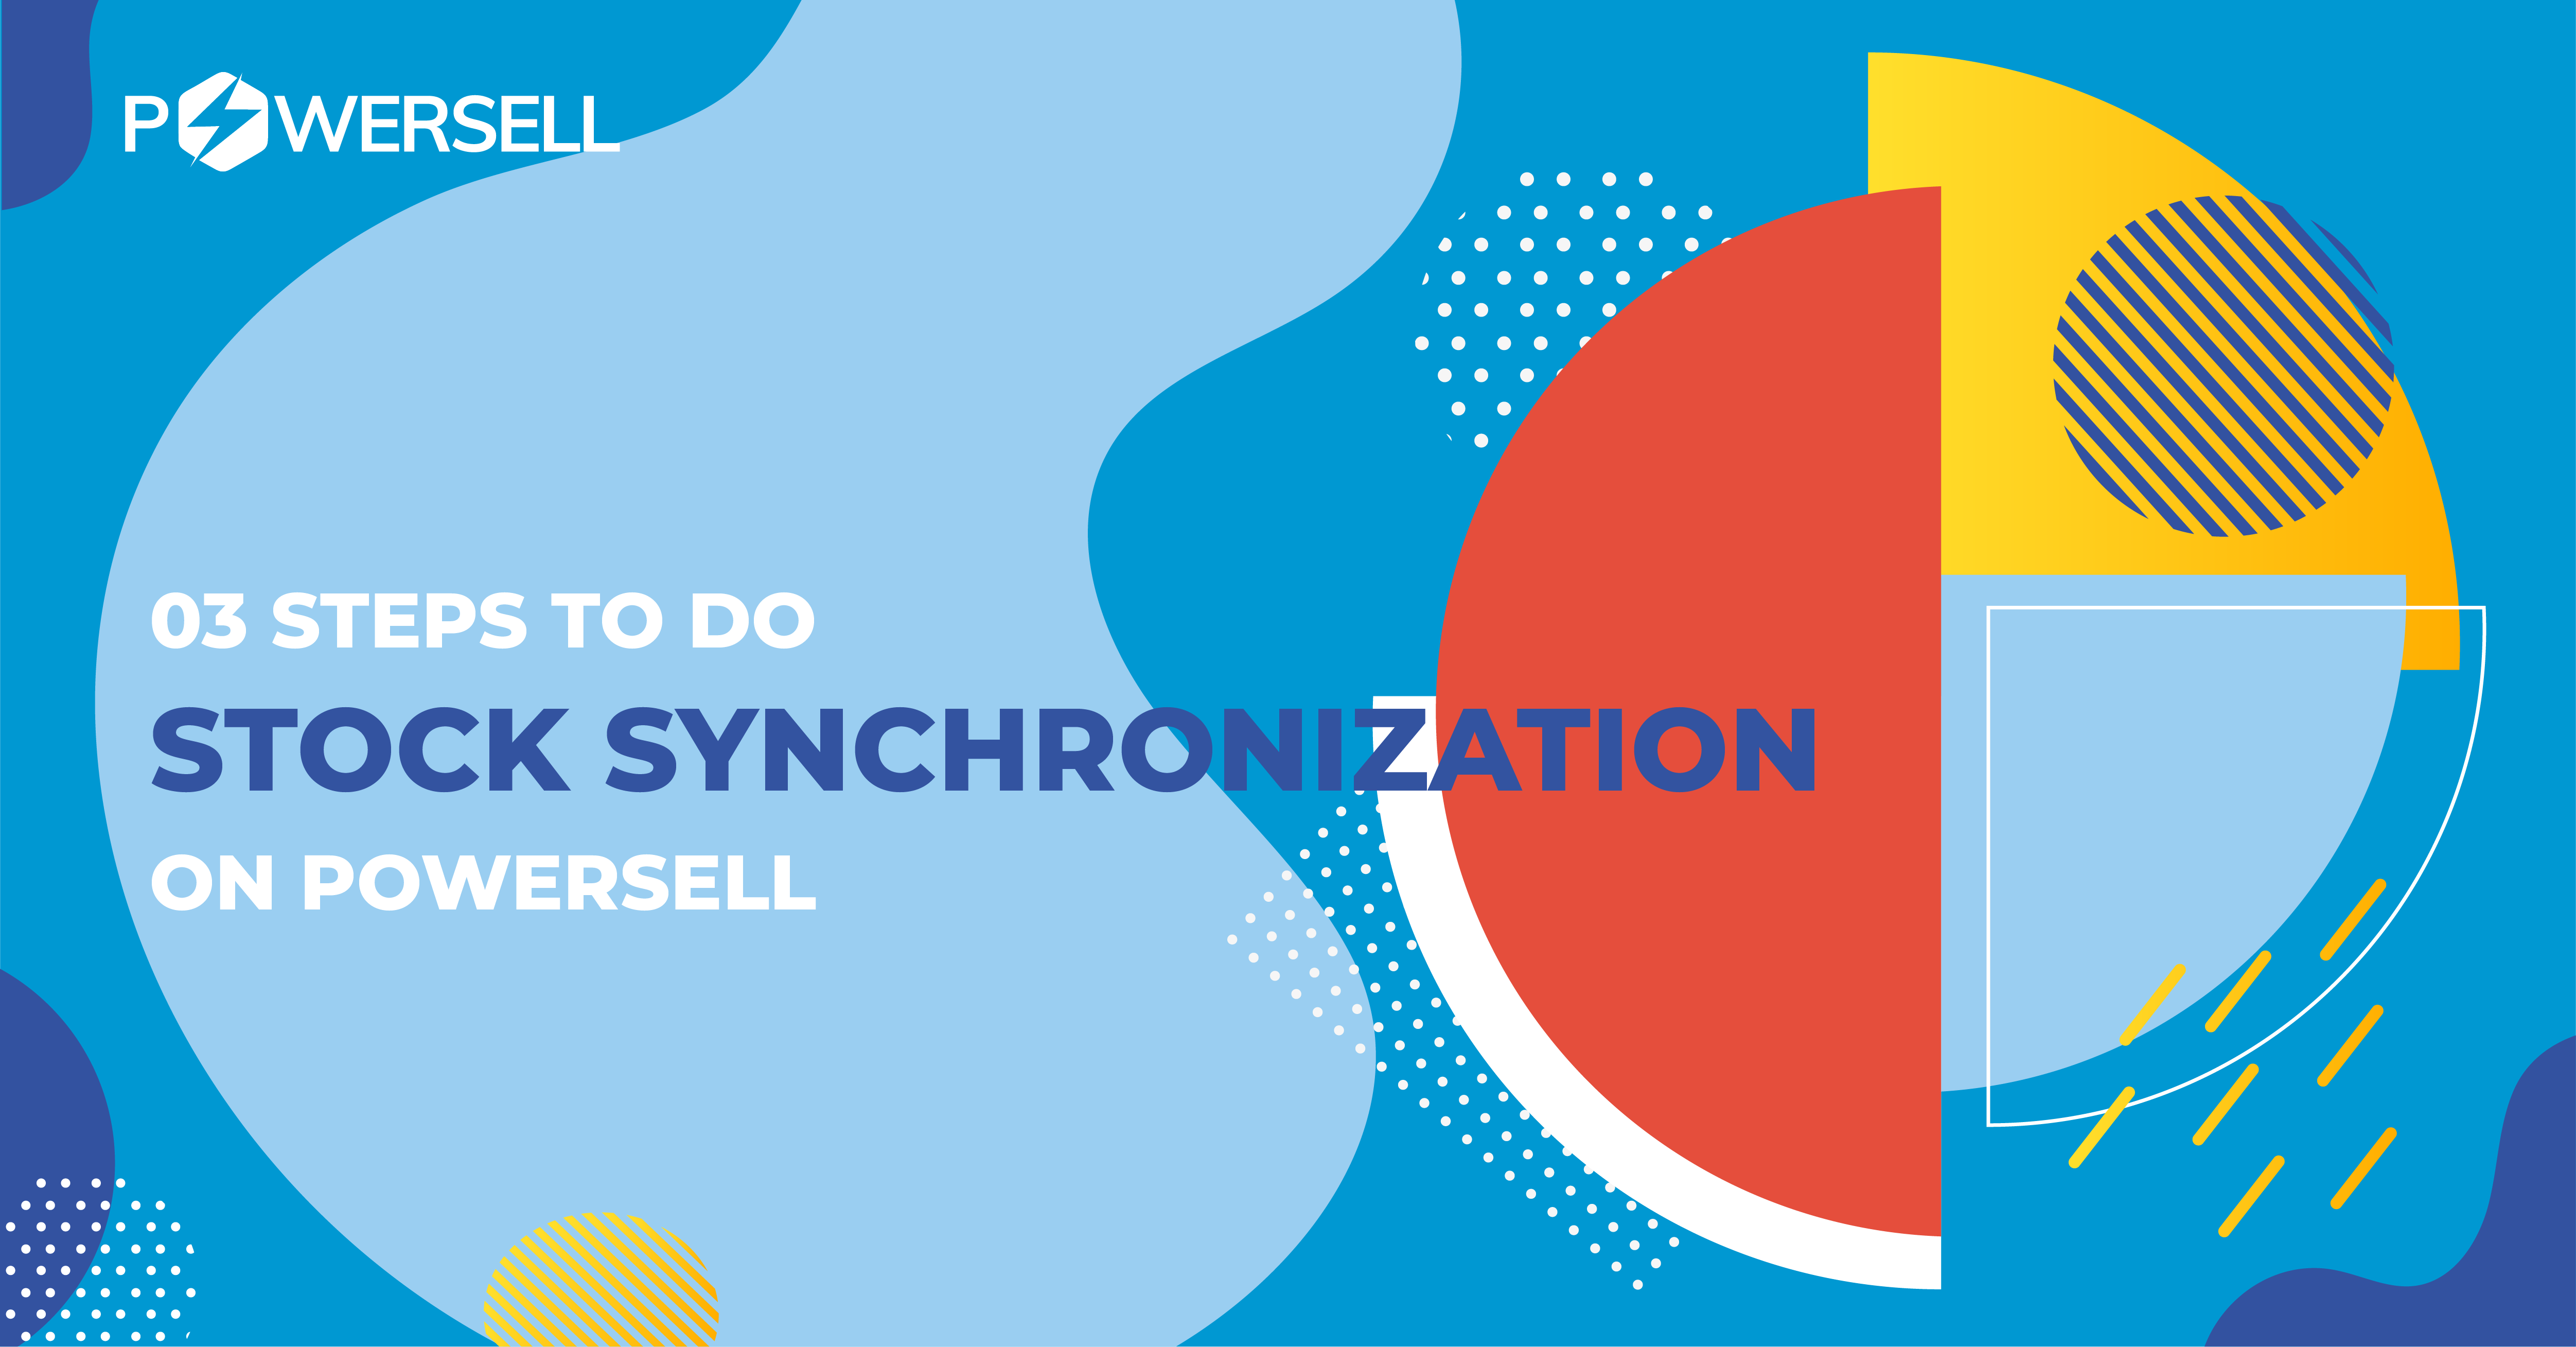 03 STEPS TO DO STOCK SYNCHRONIZATION ON POWERSELL